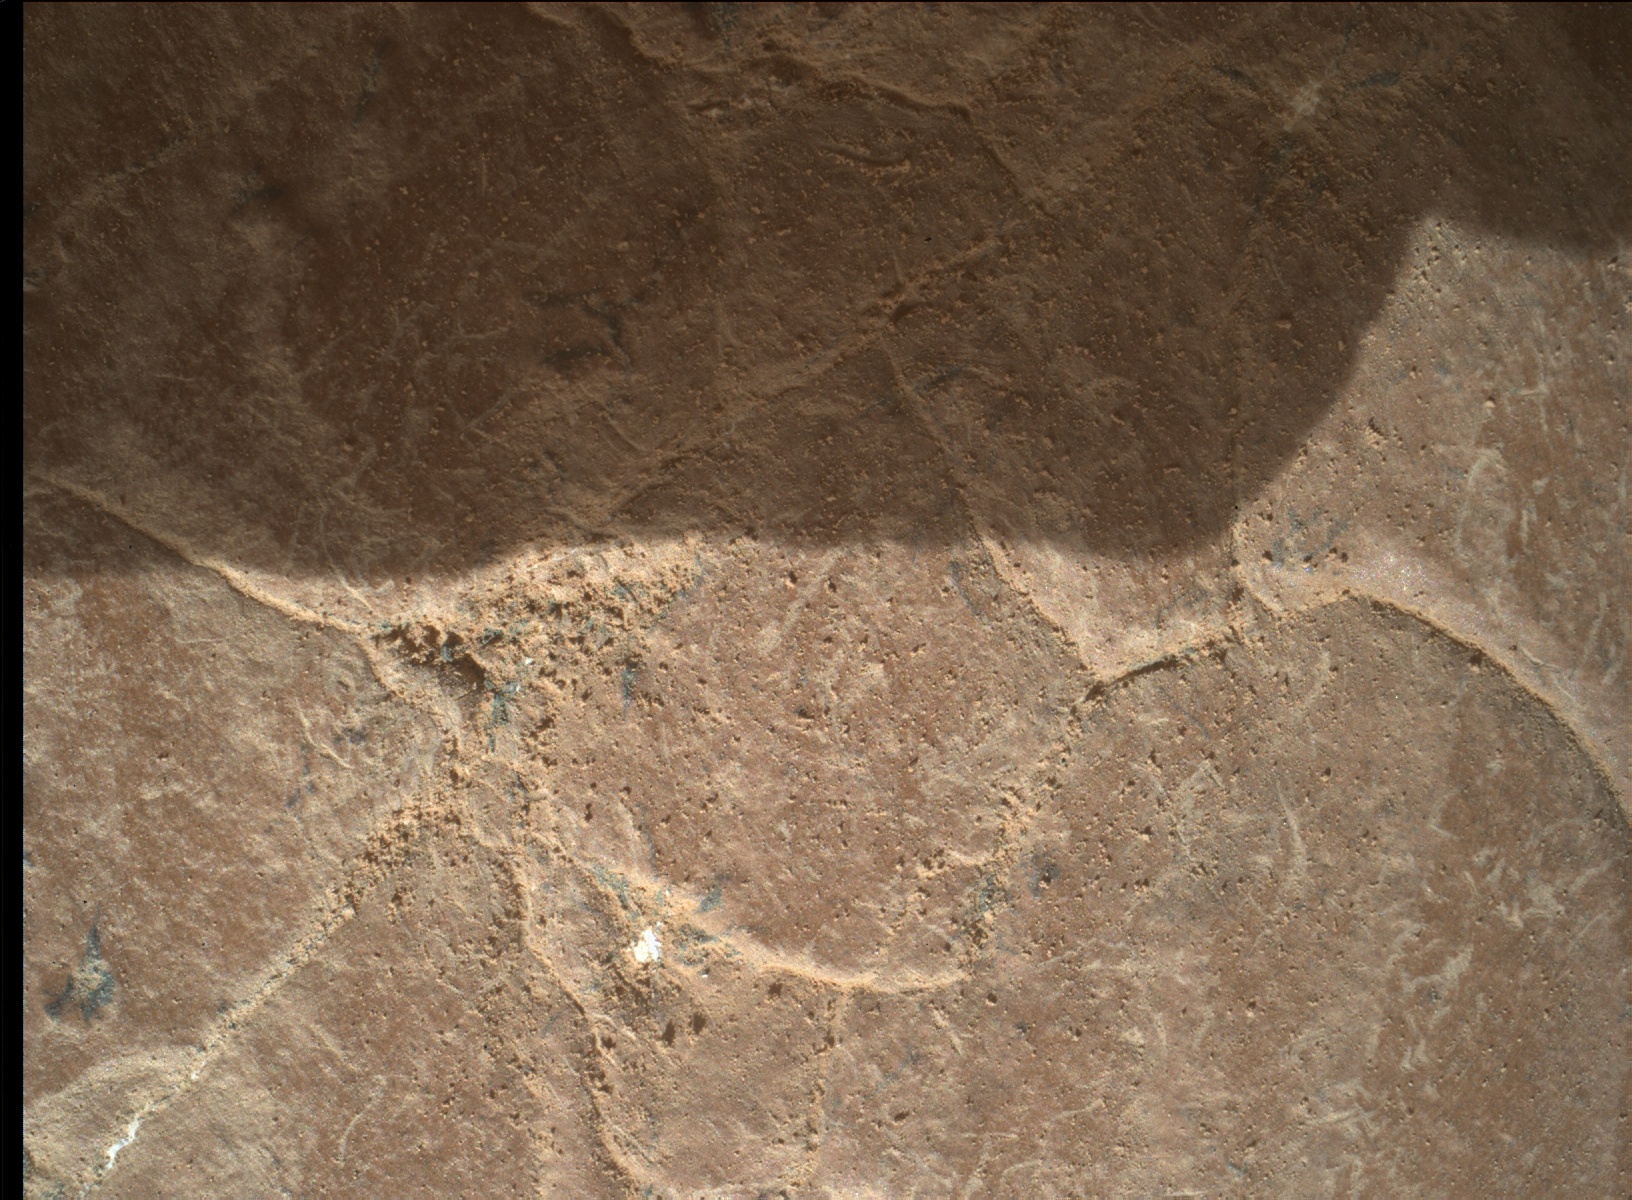 Nasa's Mars rover Curiosity acquired this image using its Mars Hand Lens Imager (MAHLI) on Sol 2597